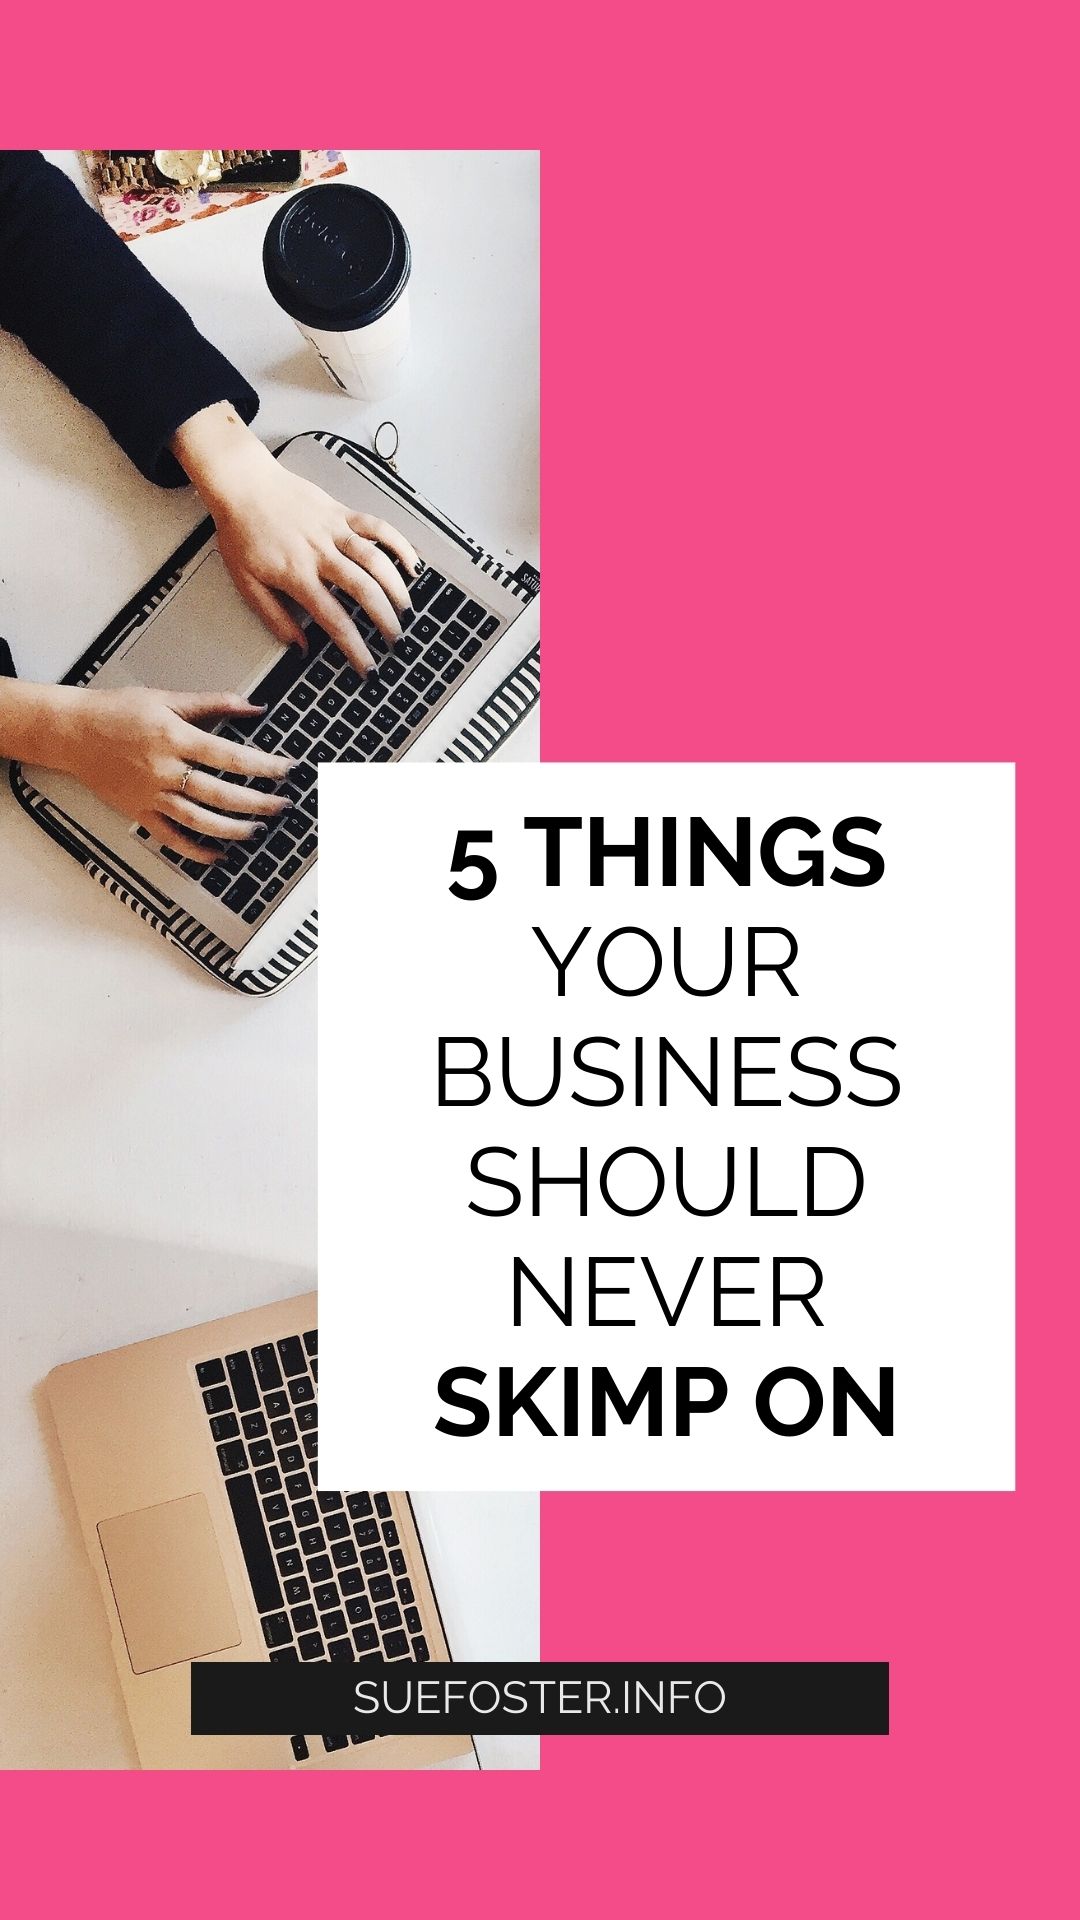 There are certain things that your business should never skimp on. By paying a little more for them, you can enhance your business and boost your bottom line. 